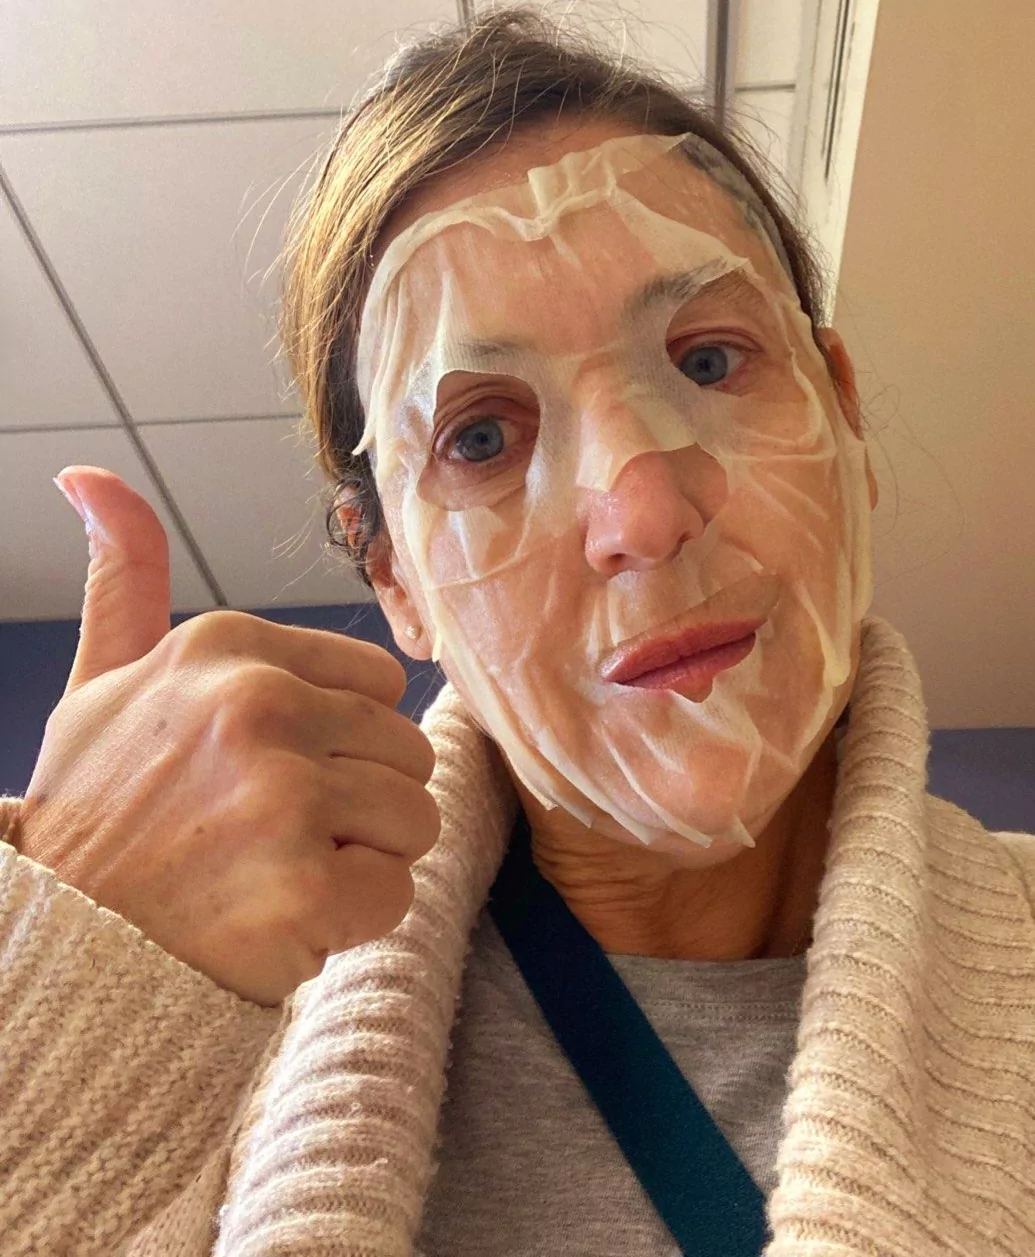 Sherry wearing a facial mask and giving a thumb's up.